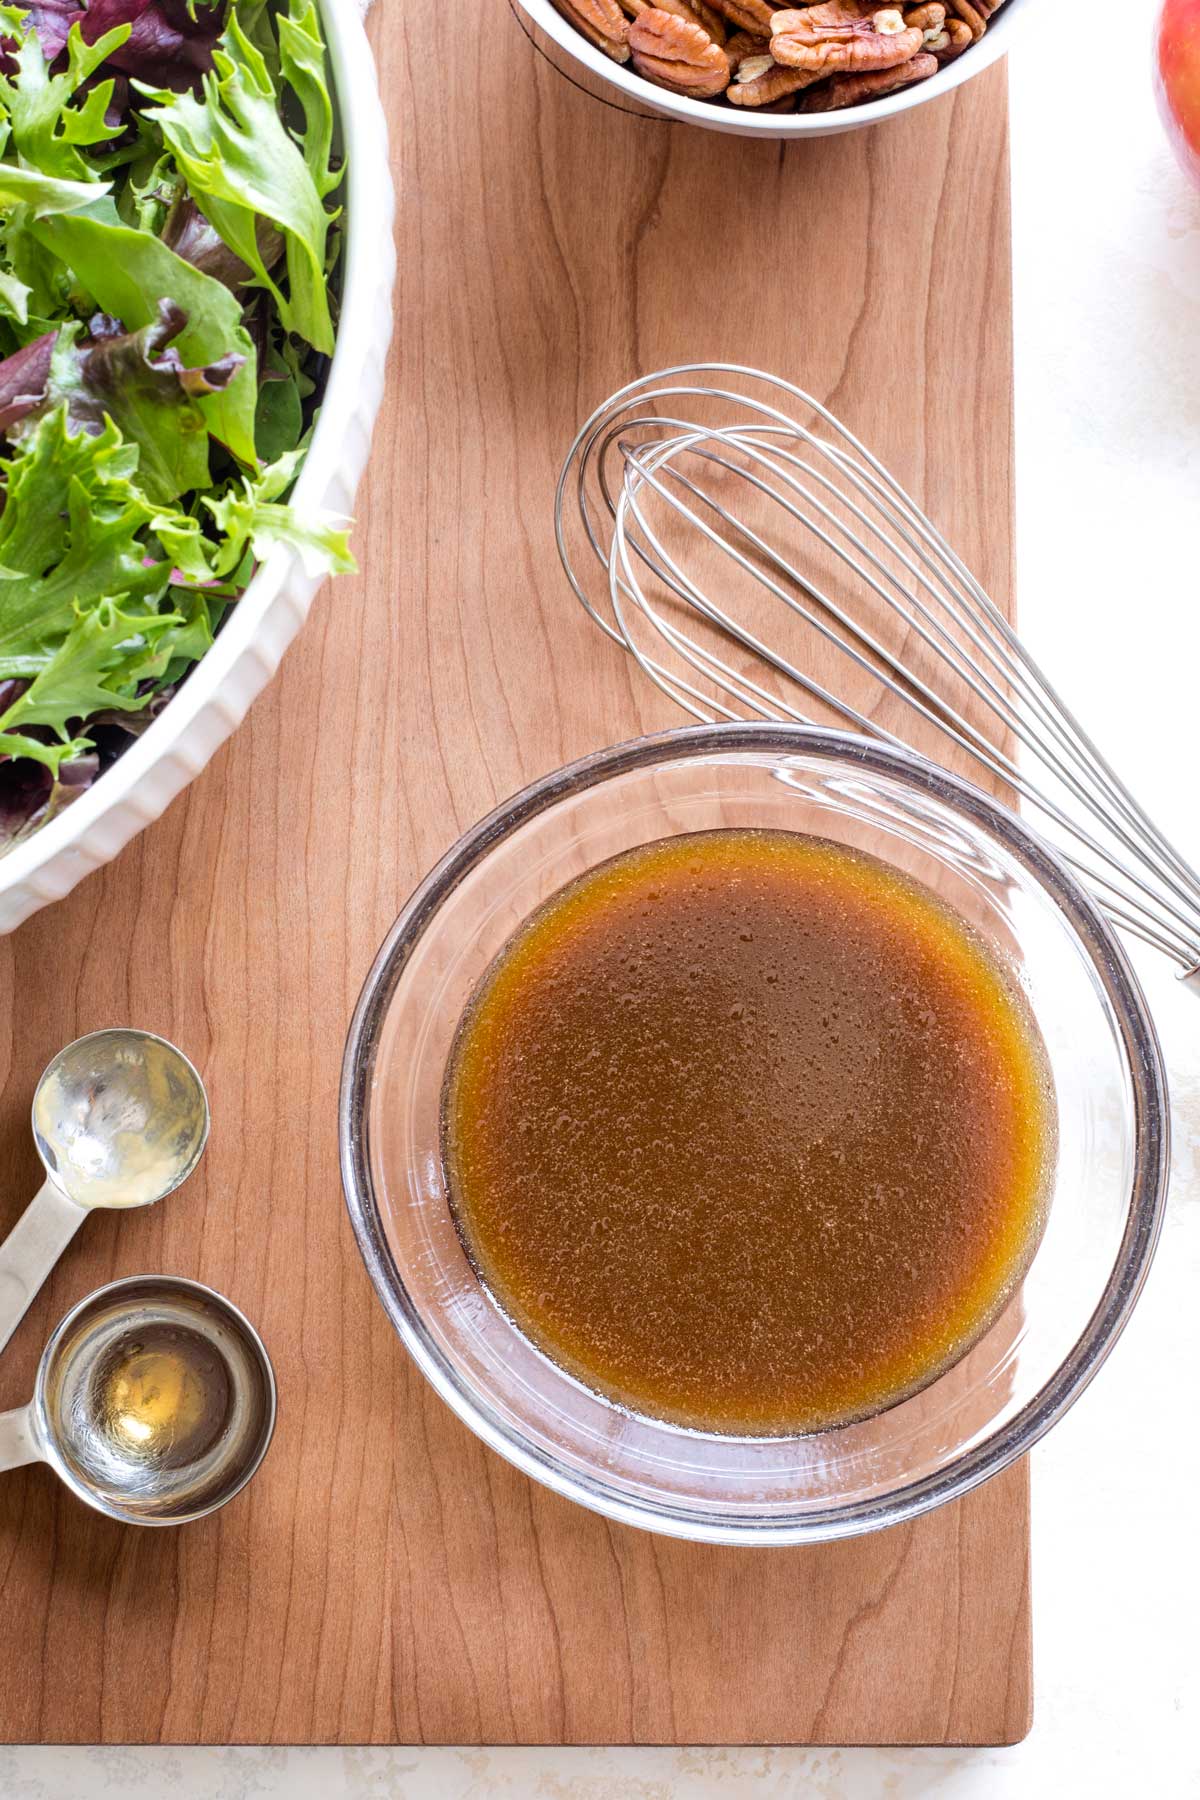 Small glass bowl of Balsamic Dressing with whisk, measuring spoons, bowls of salad and pecans nearby.